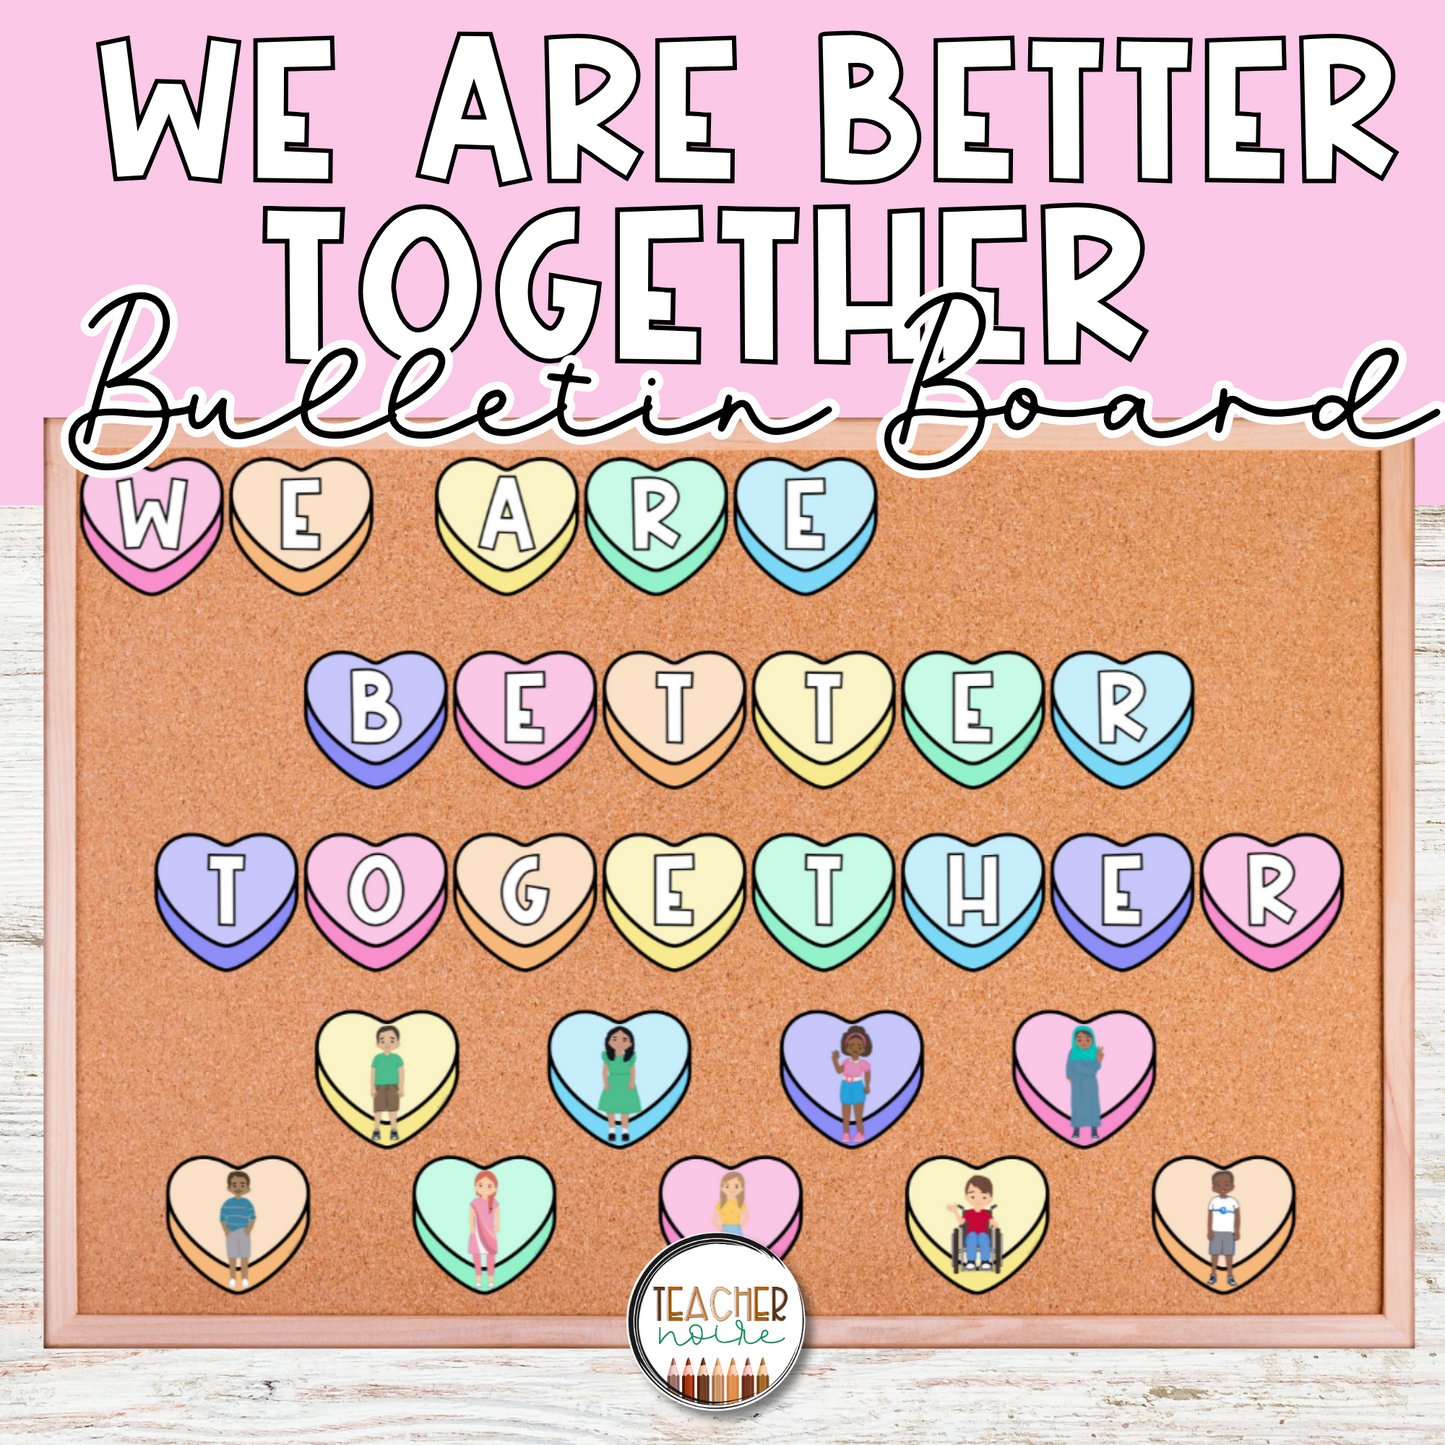 February Valentine's Day Bulletin Board- We Are Better Together